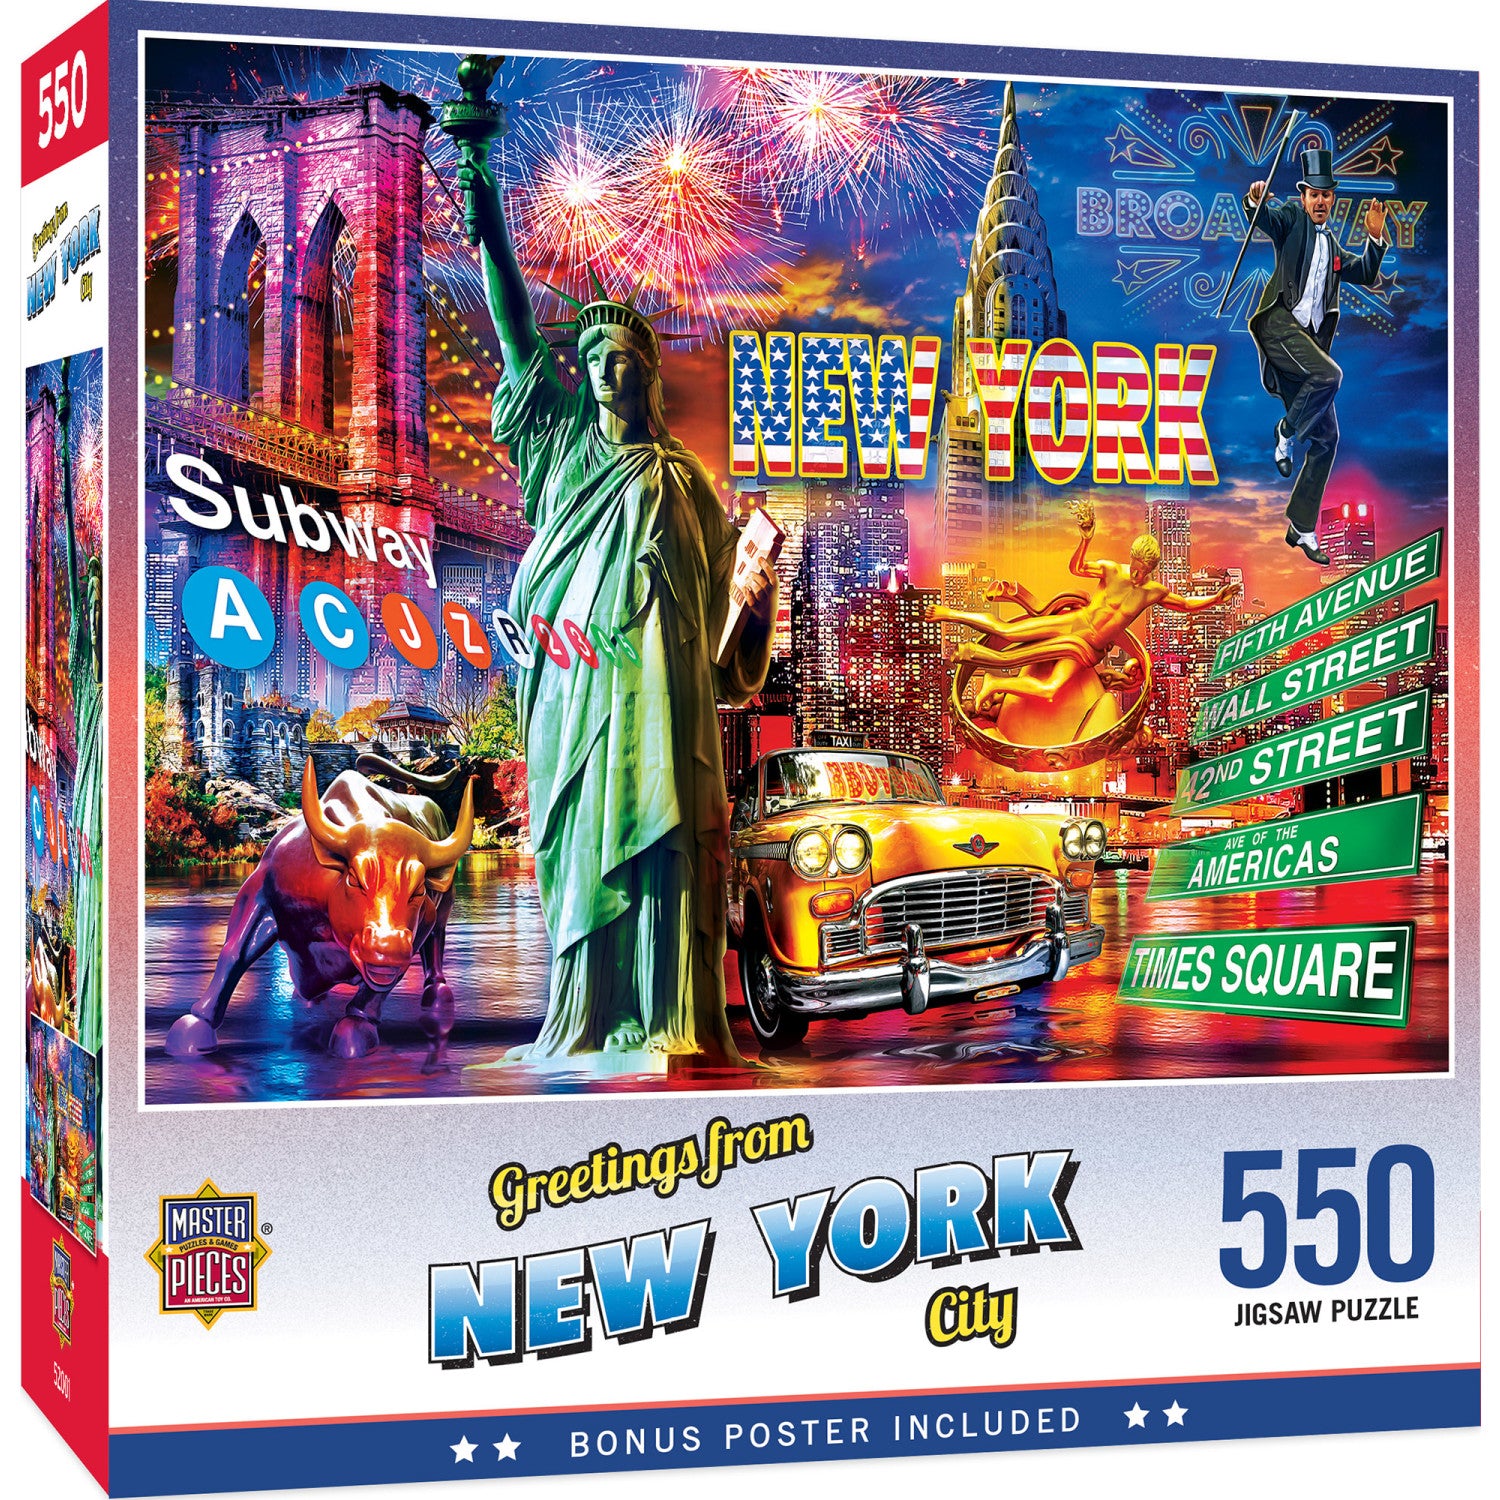 Greetings From - New York City 550 Piece Puzzle